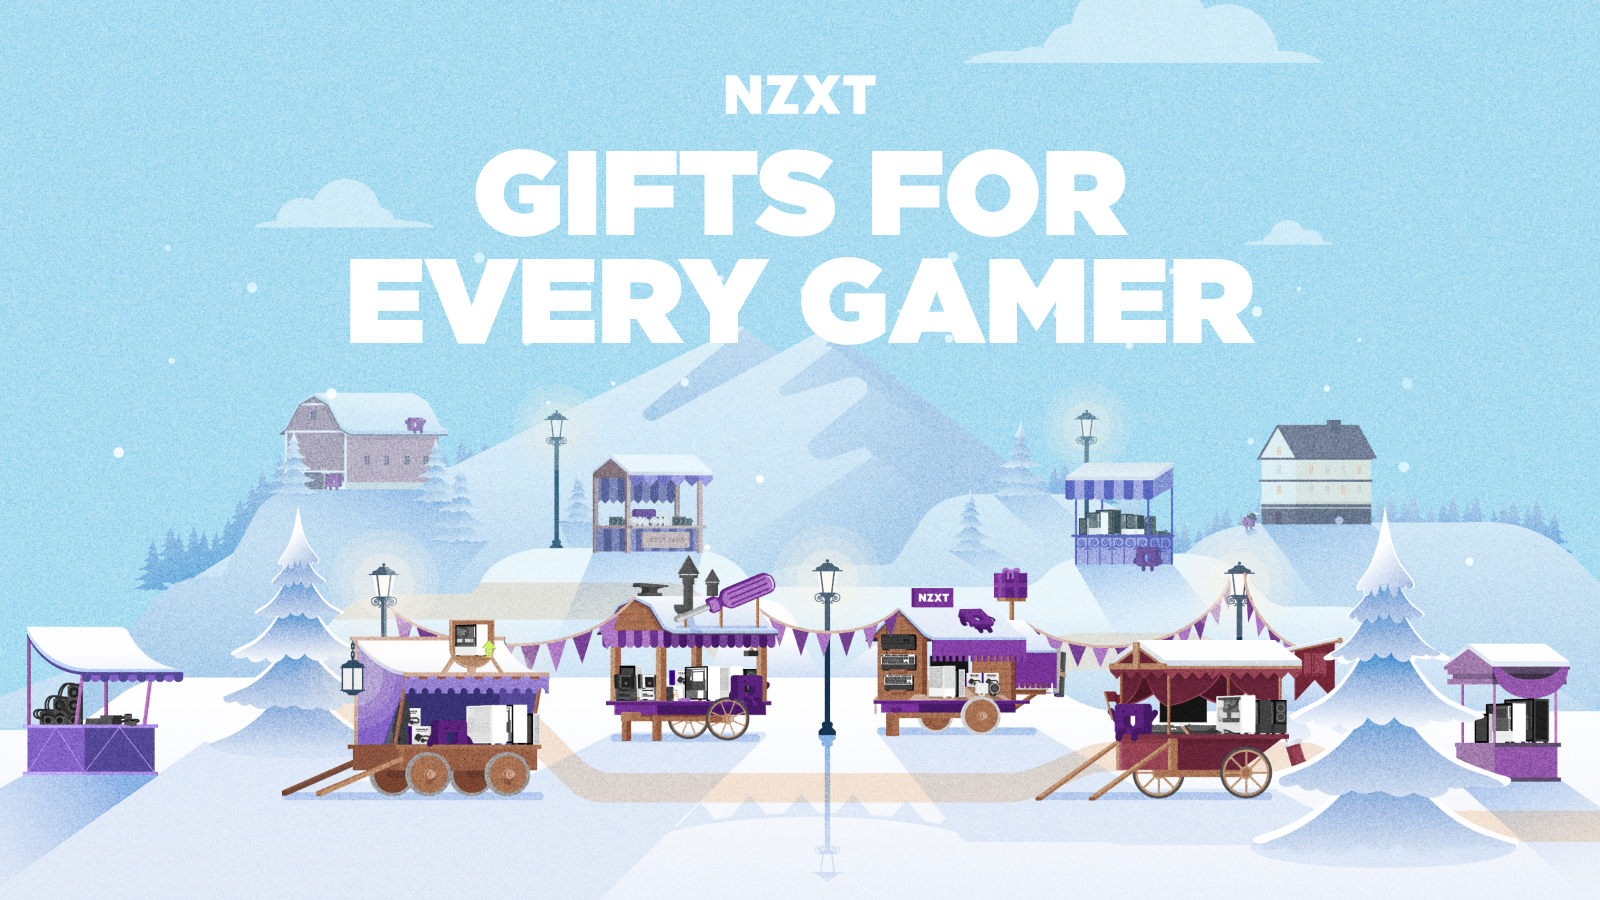 Title: "NZXT Gifts for Every Gamer" on Top of a Snowy Village